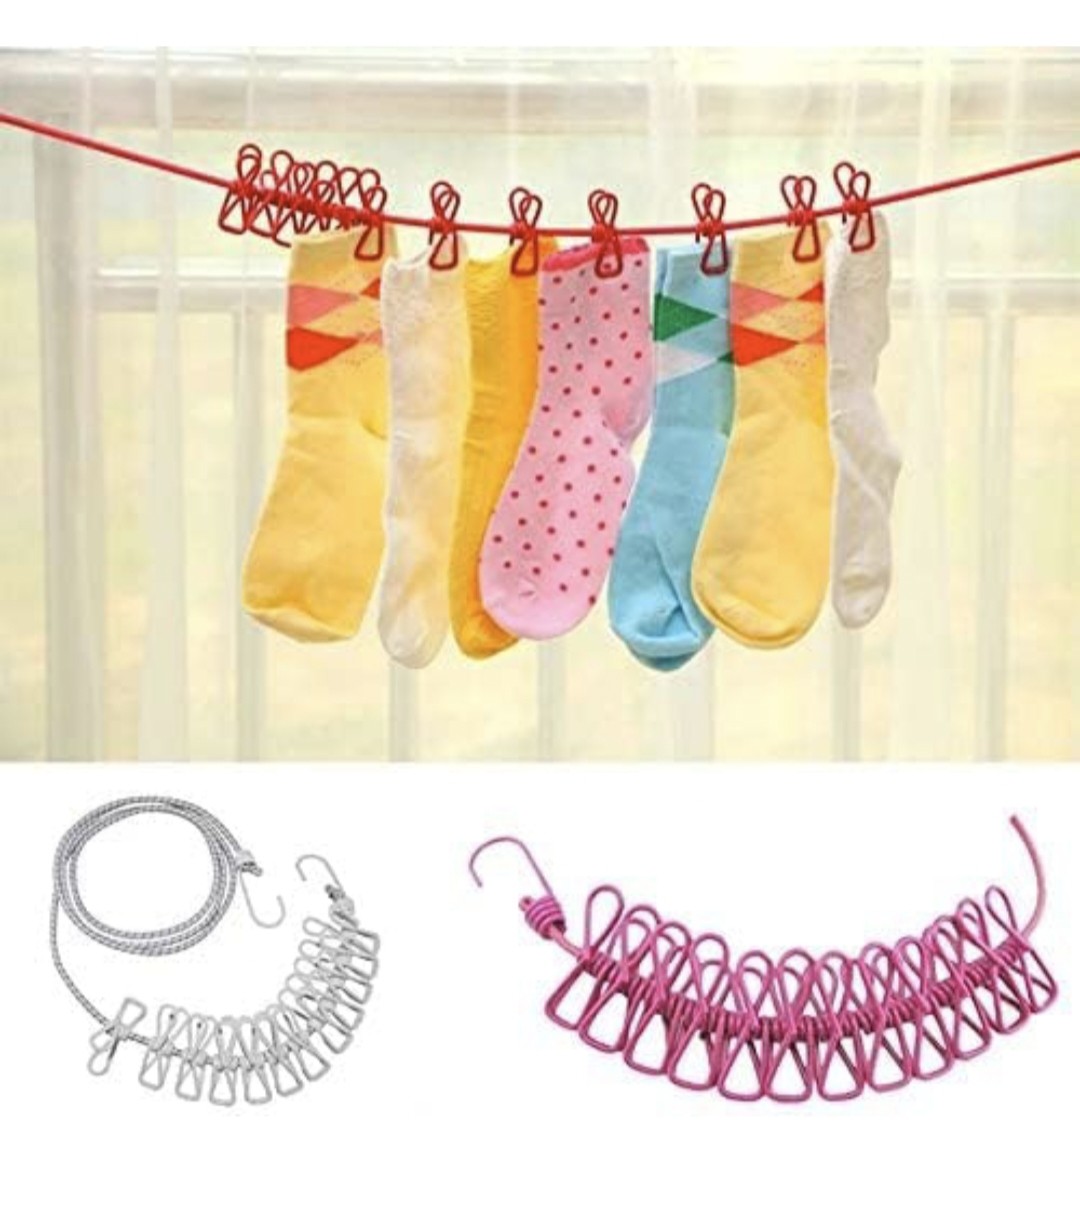 IMoa Traders- Clothsline clothes drying rope pack of 1